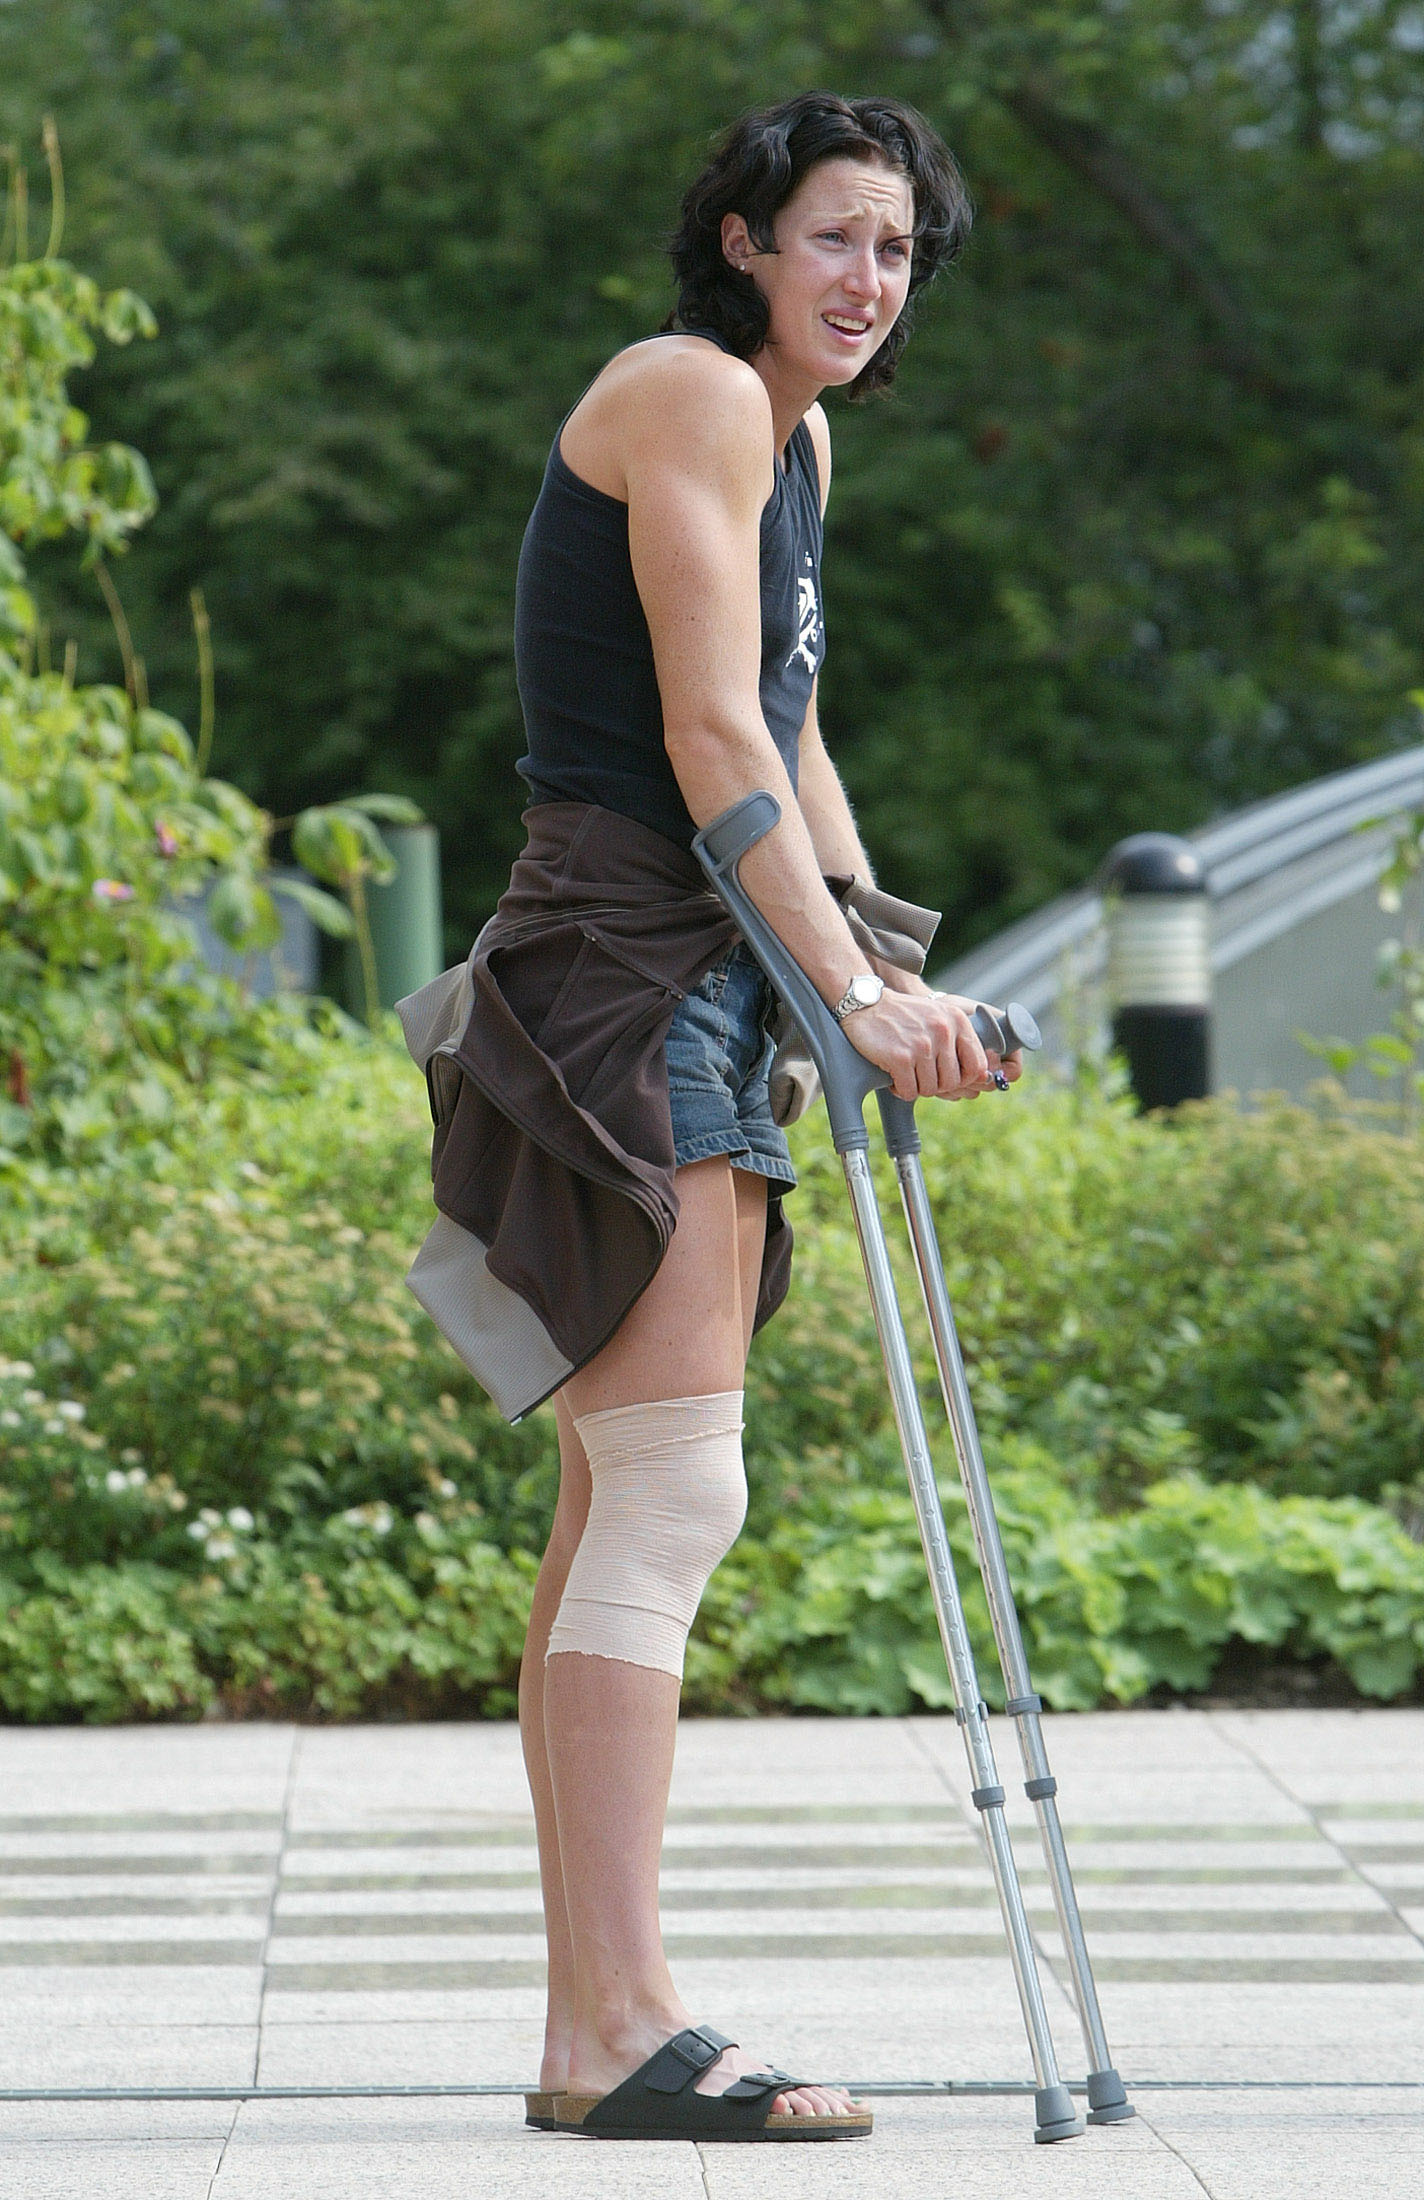 Jana Pittman, with bandaged knee and holding crutches, stands with brow furrowed.